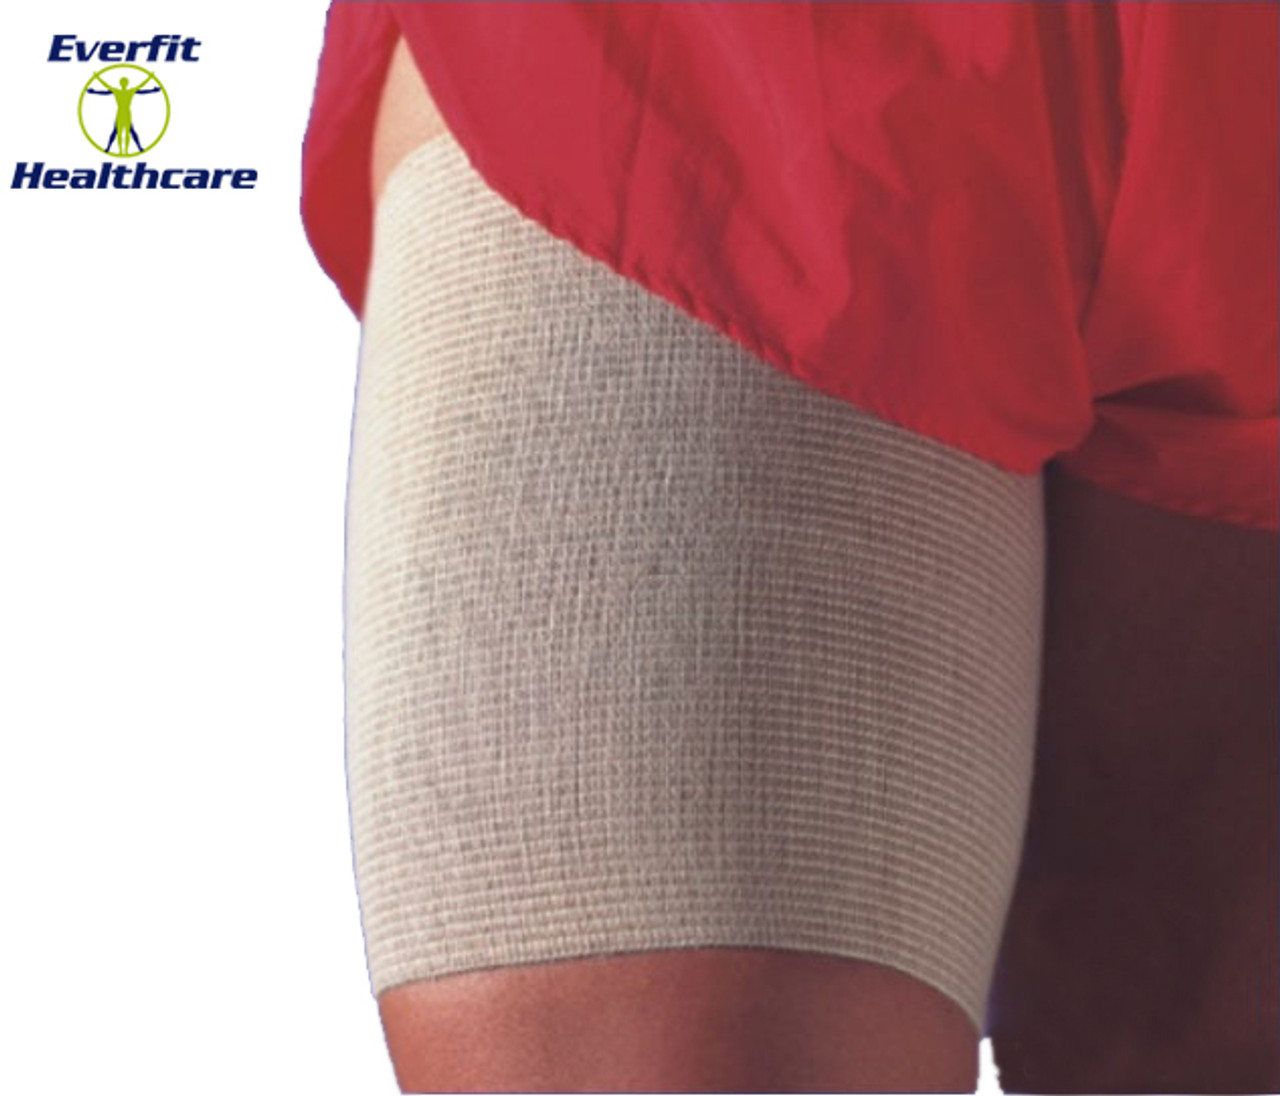 McDavid Compression Leg Sleeves - Everfit Healthcare Australia Largest  Equipment SuperStore! Quality and Savings!